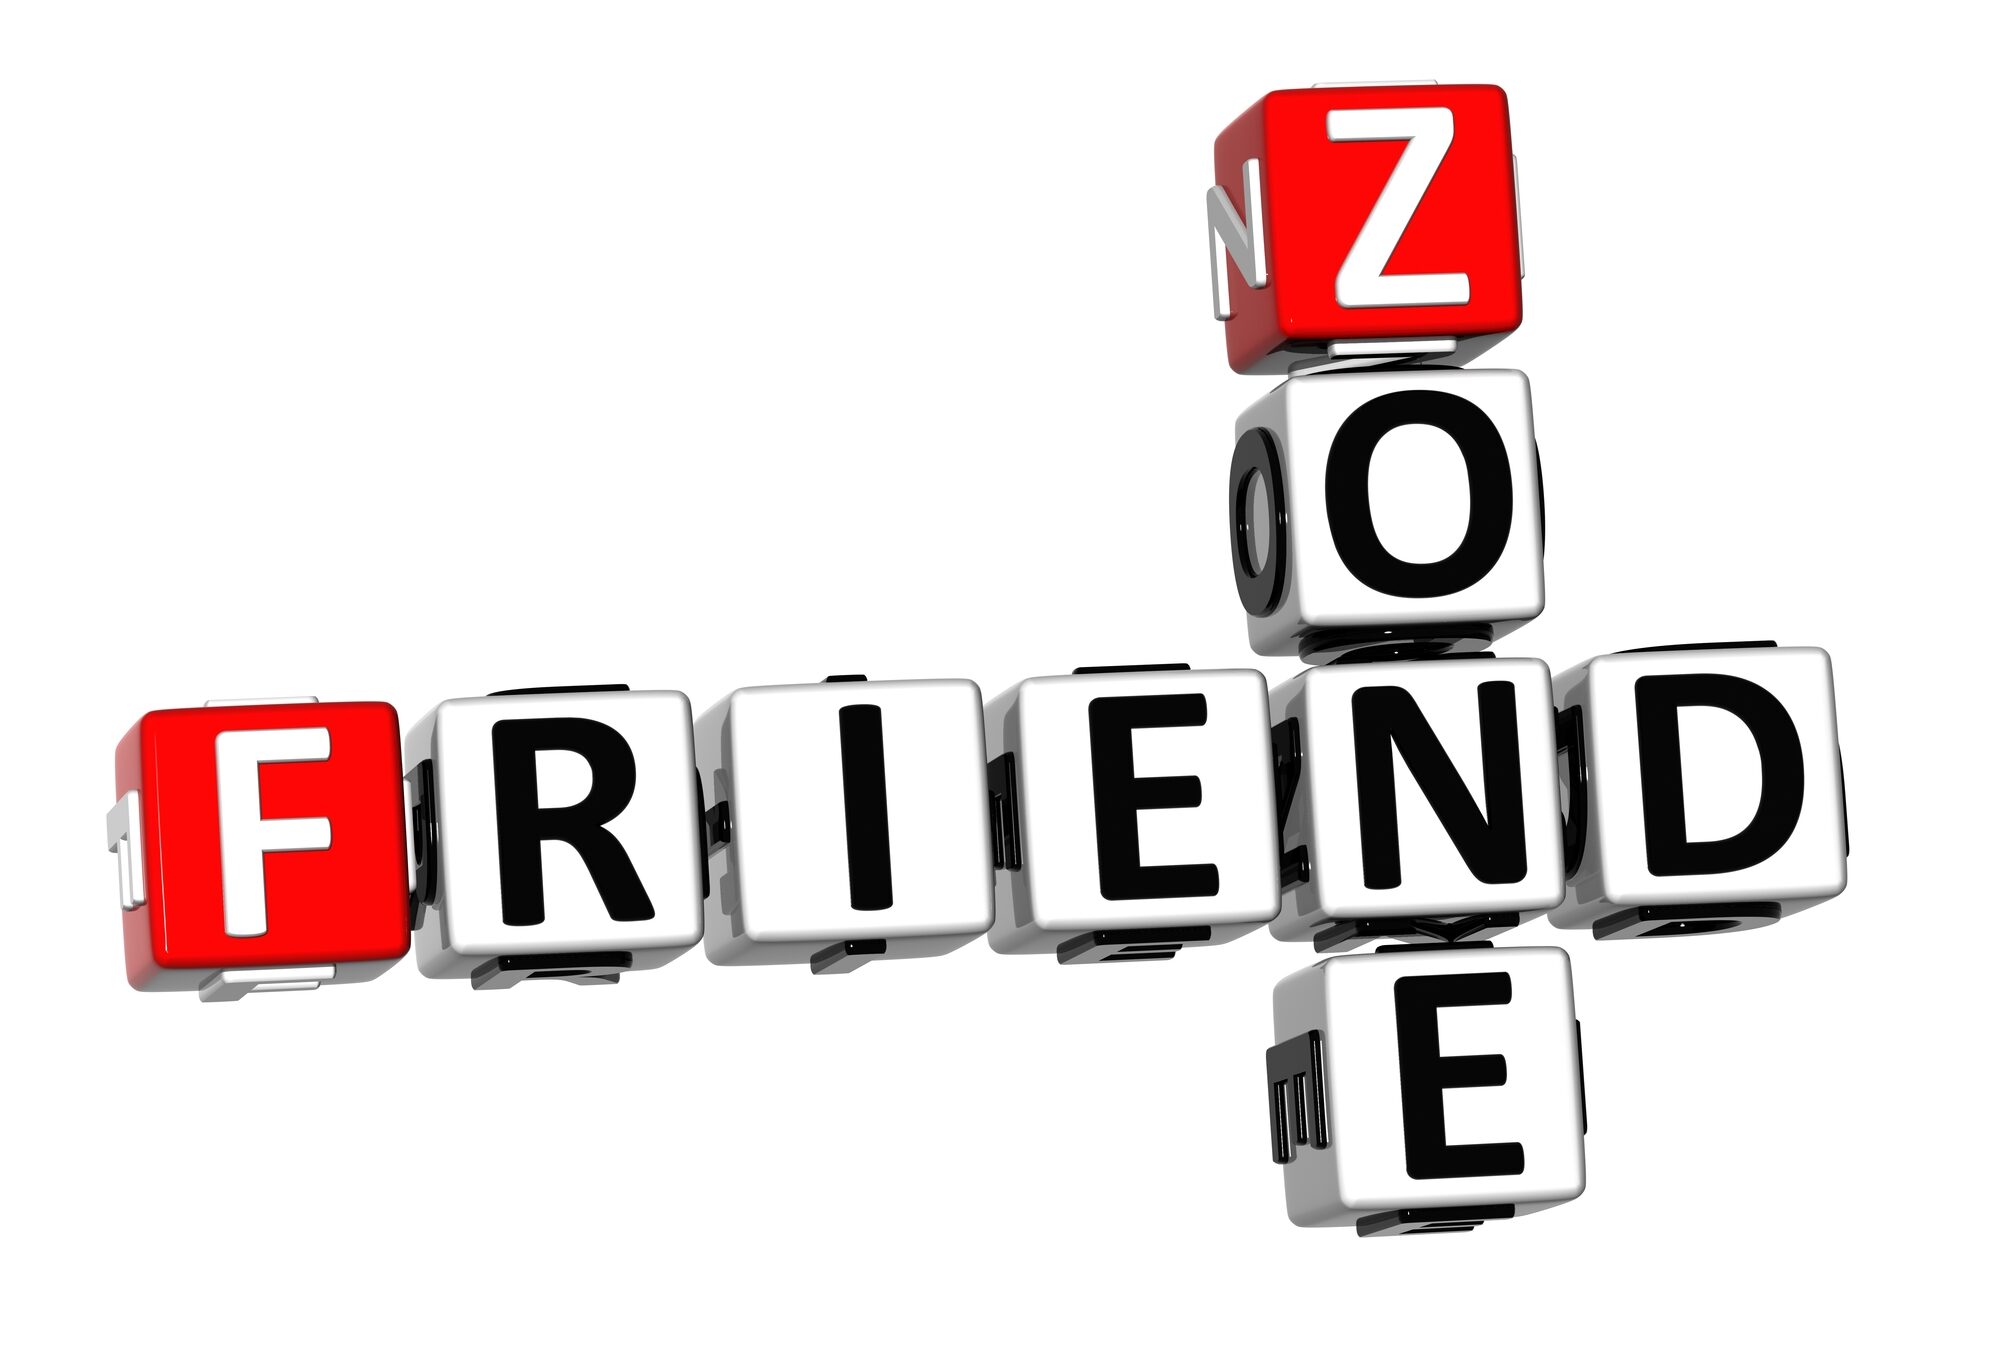 Are you afraid you're going to be friend zoned?